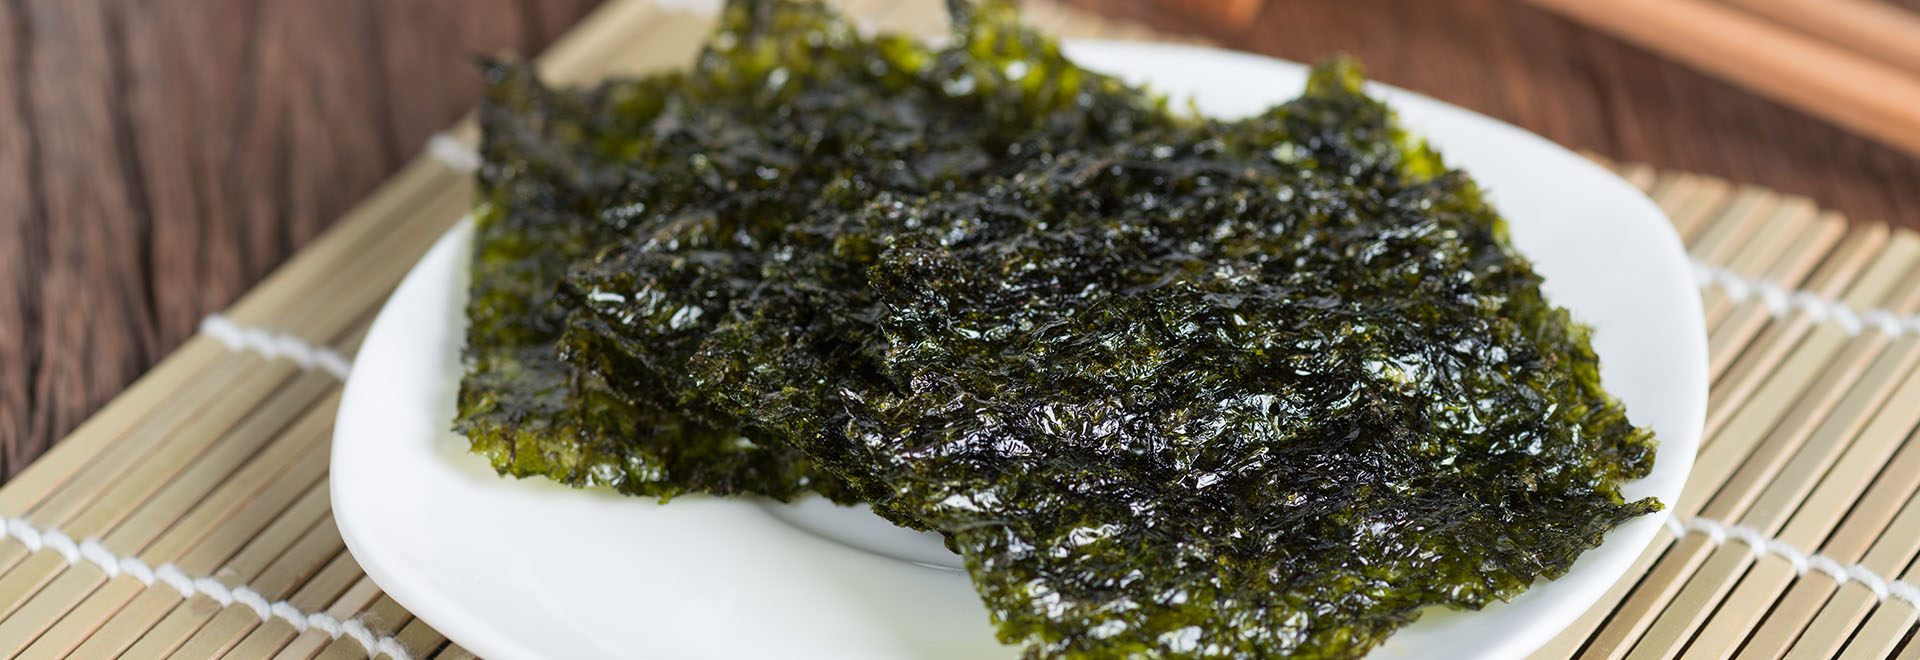 nutritional-values-of-seaweed-and-recipes